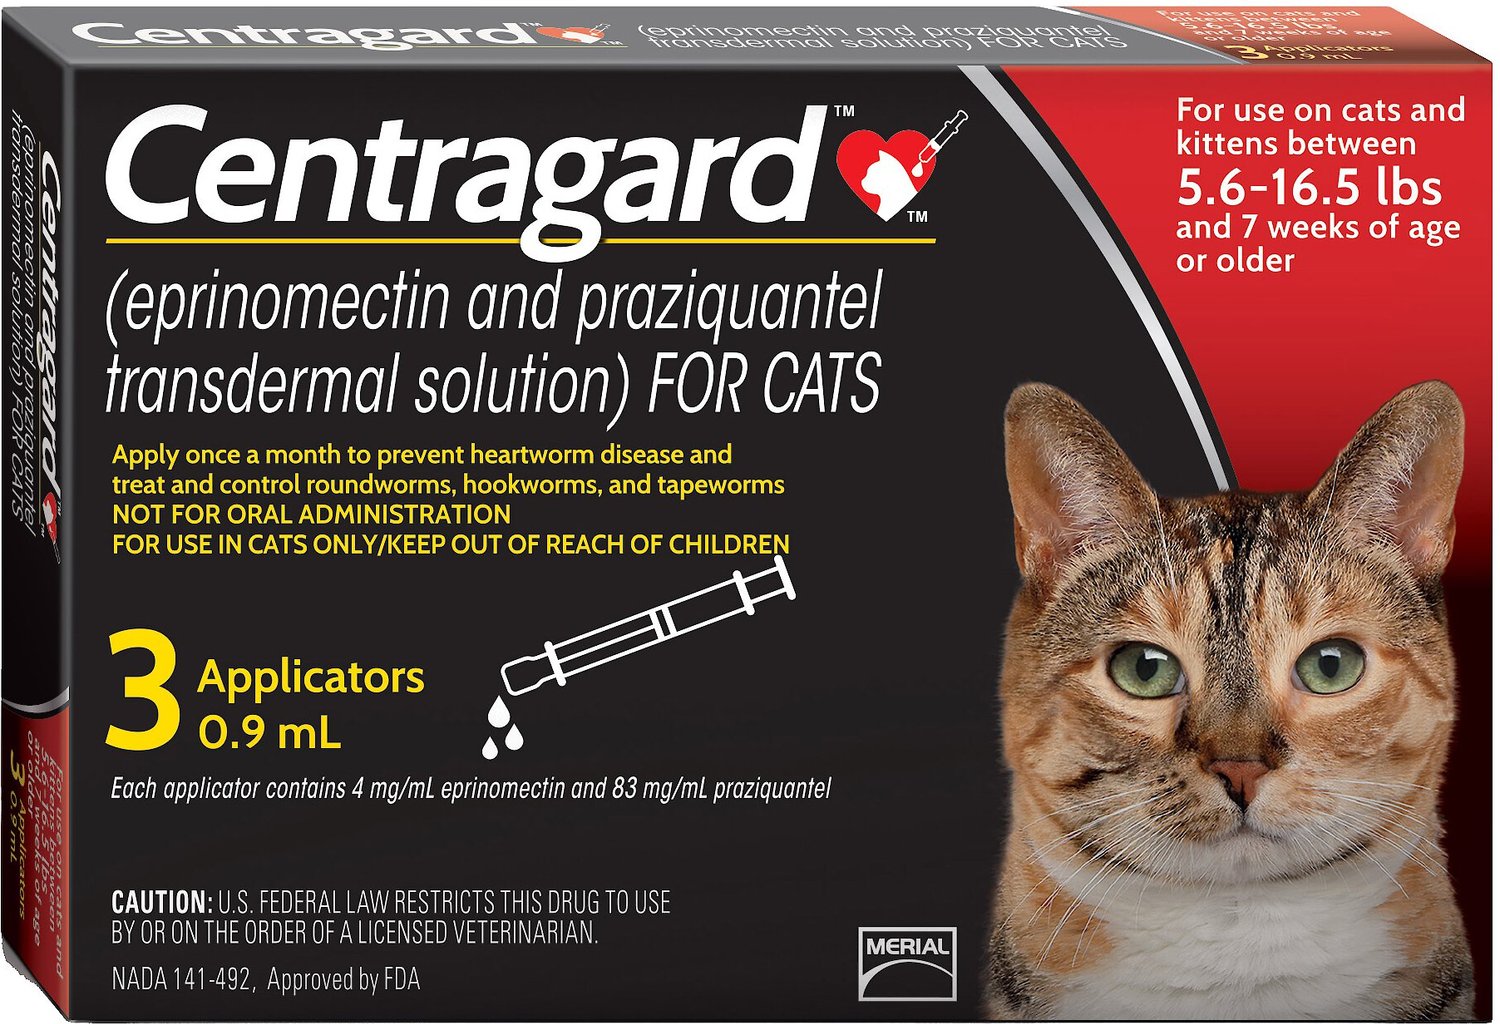 Centragard for Cats 5.616.5 lbs, 3 treatment (Red Box)